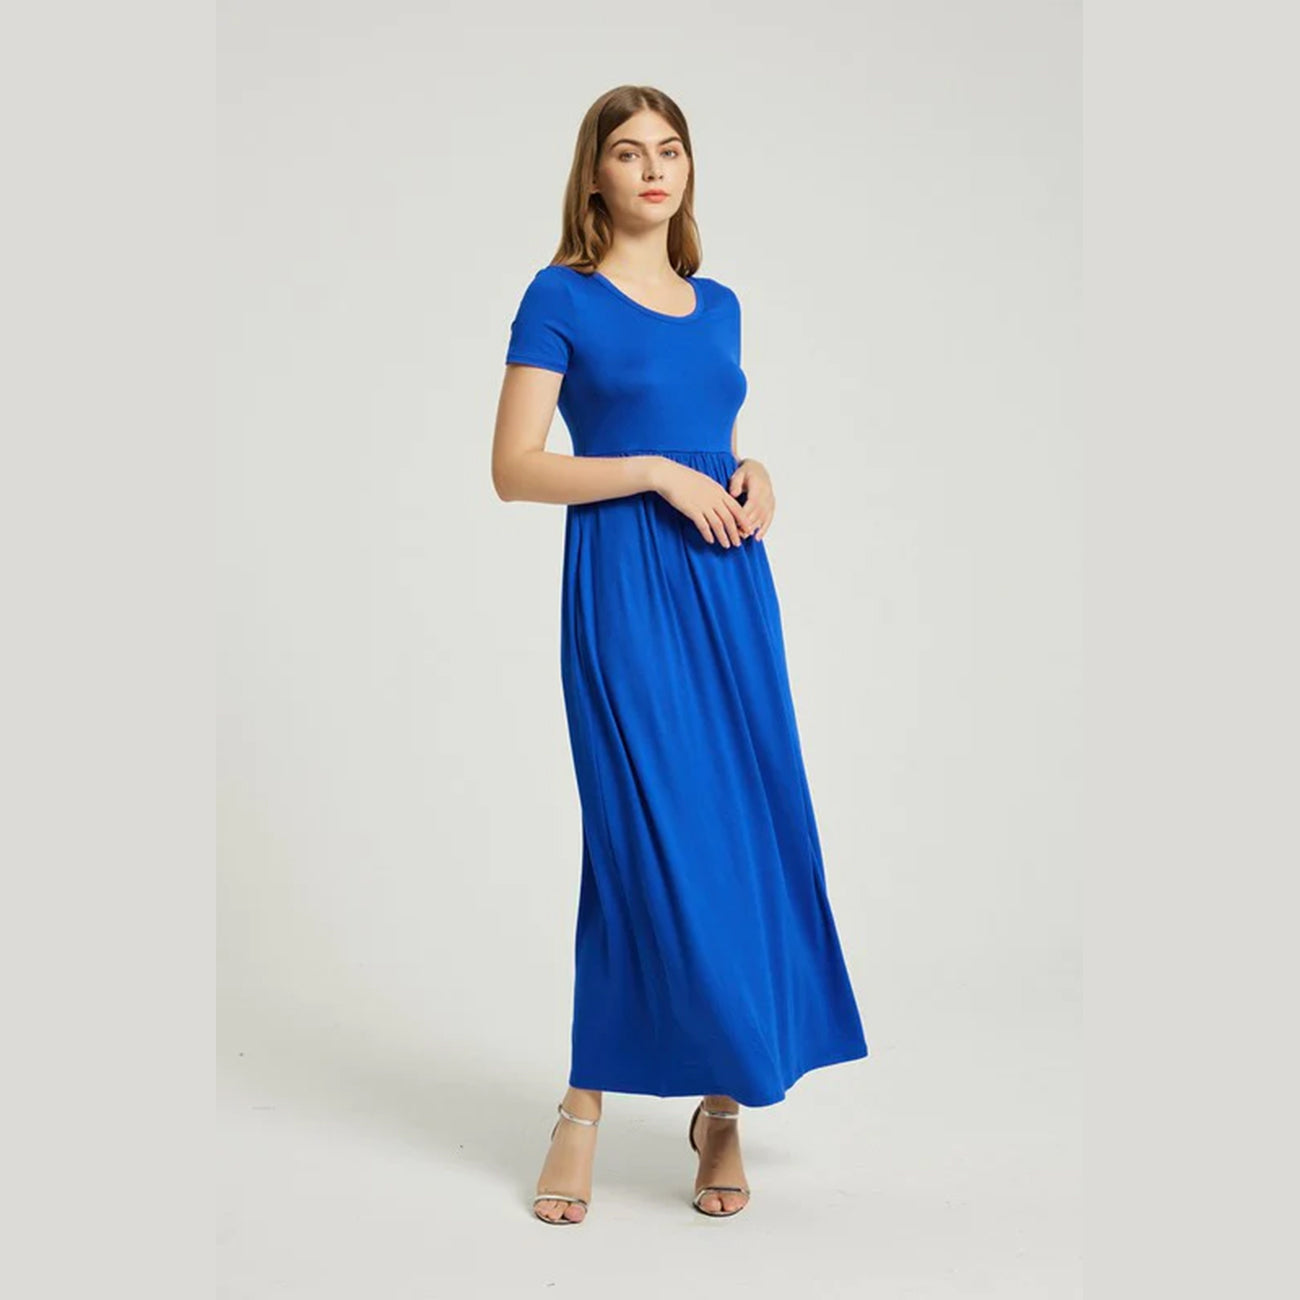 Women's Summer Casual Maxi Dress With Pocket- Blue